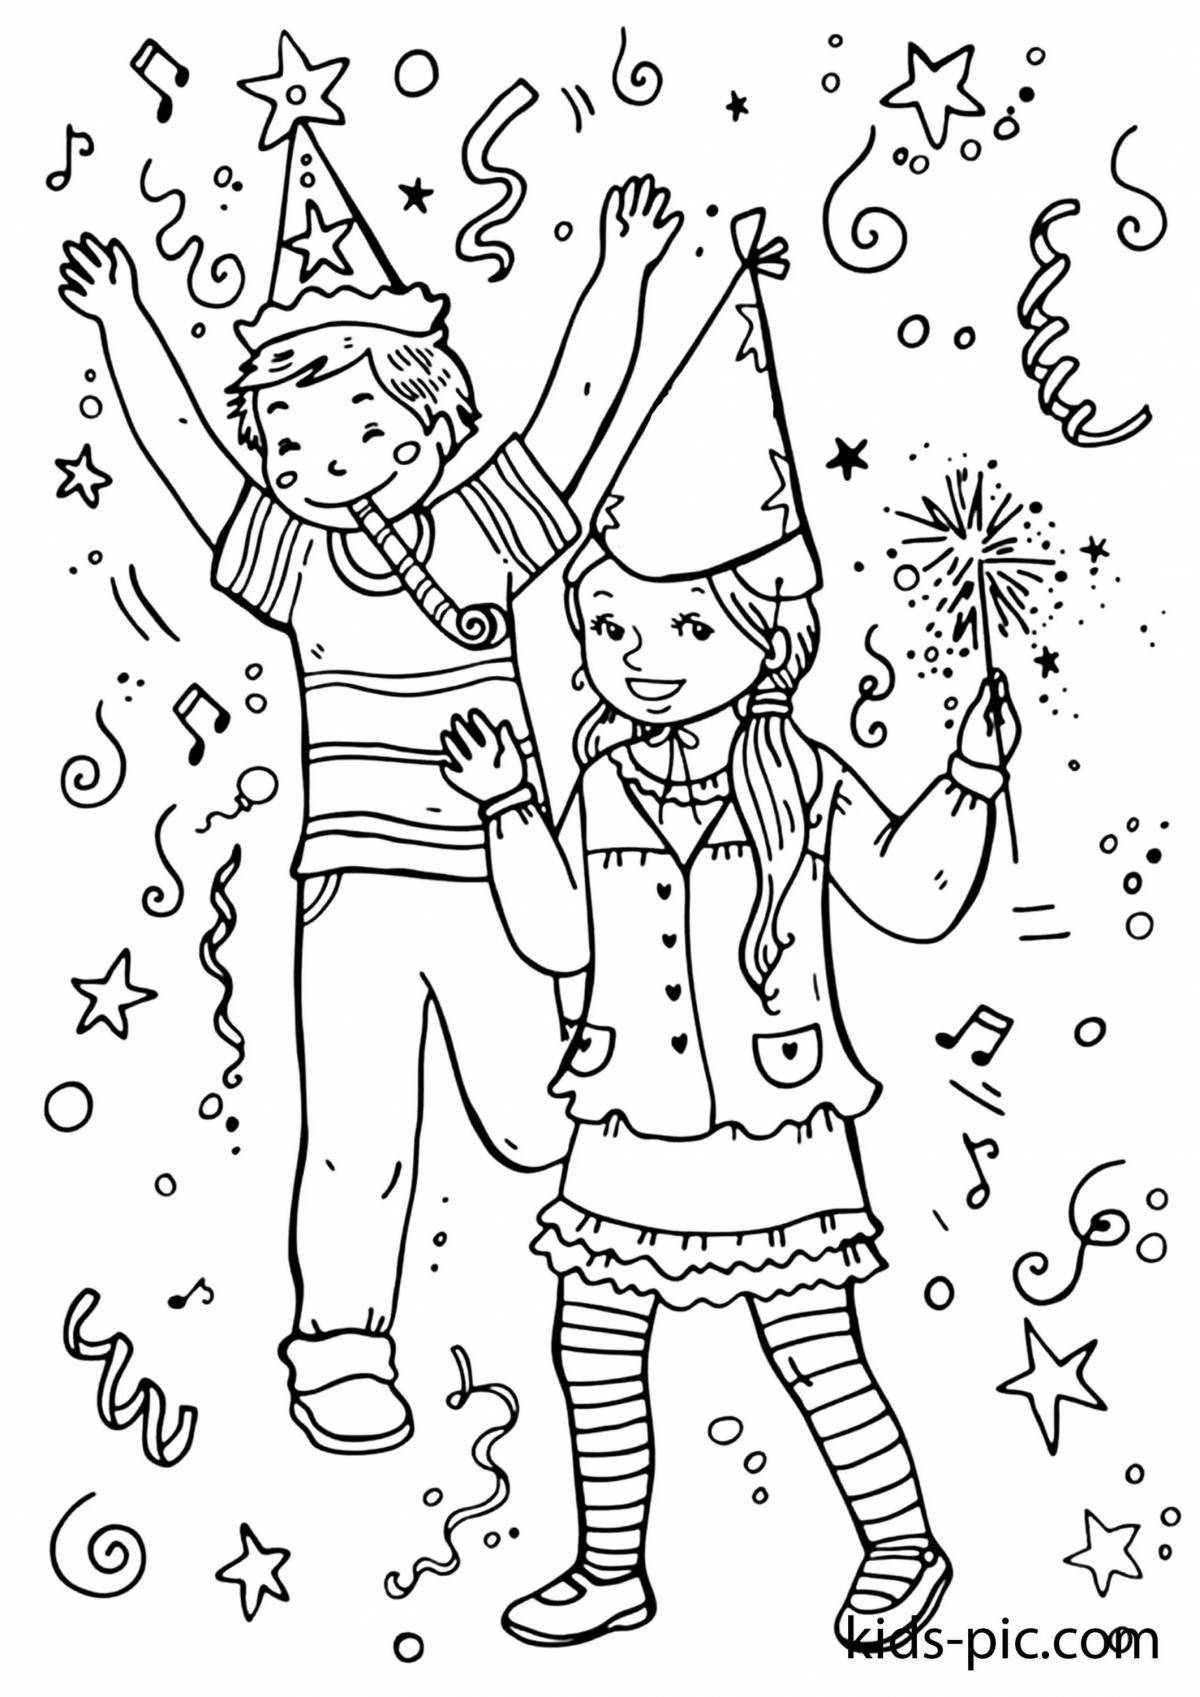 A playful Christmas coloring book for teens